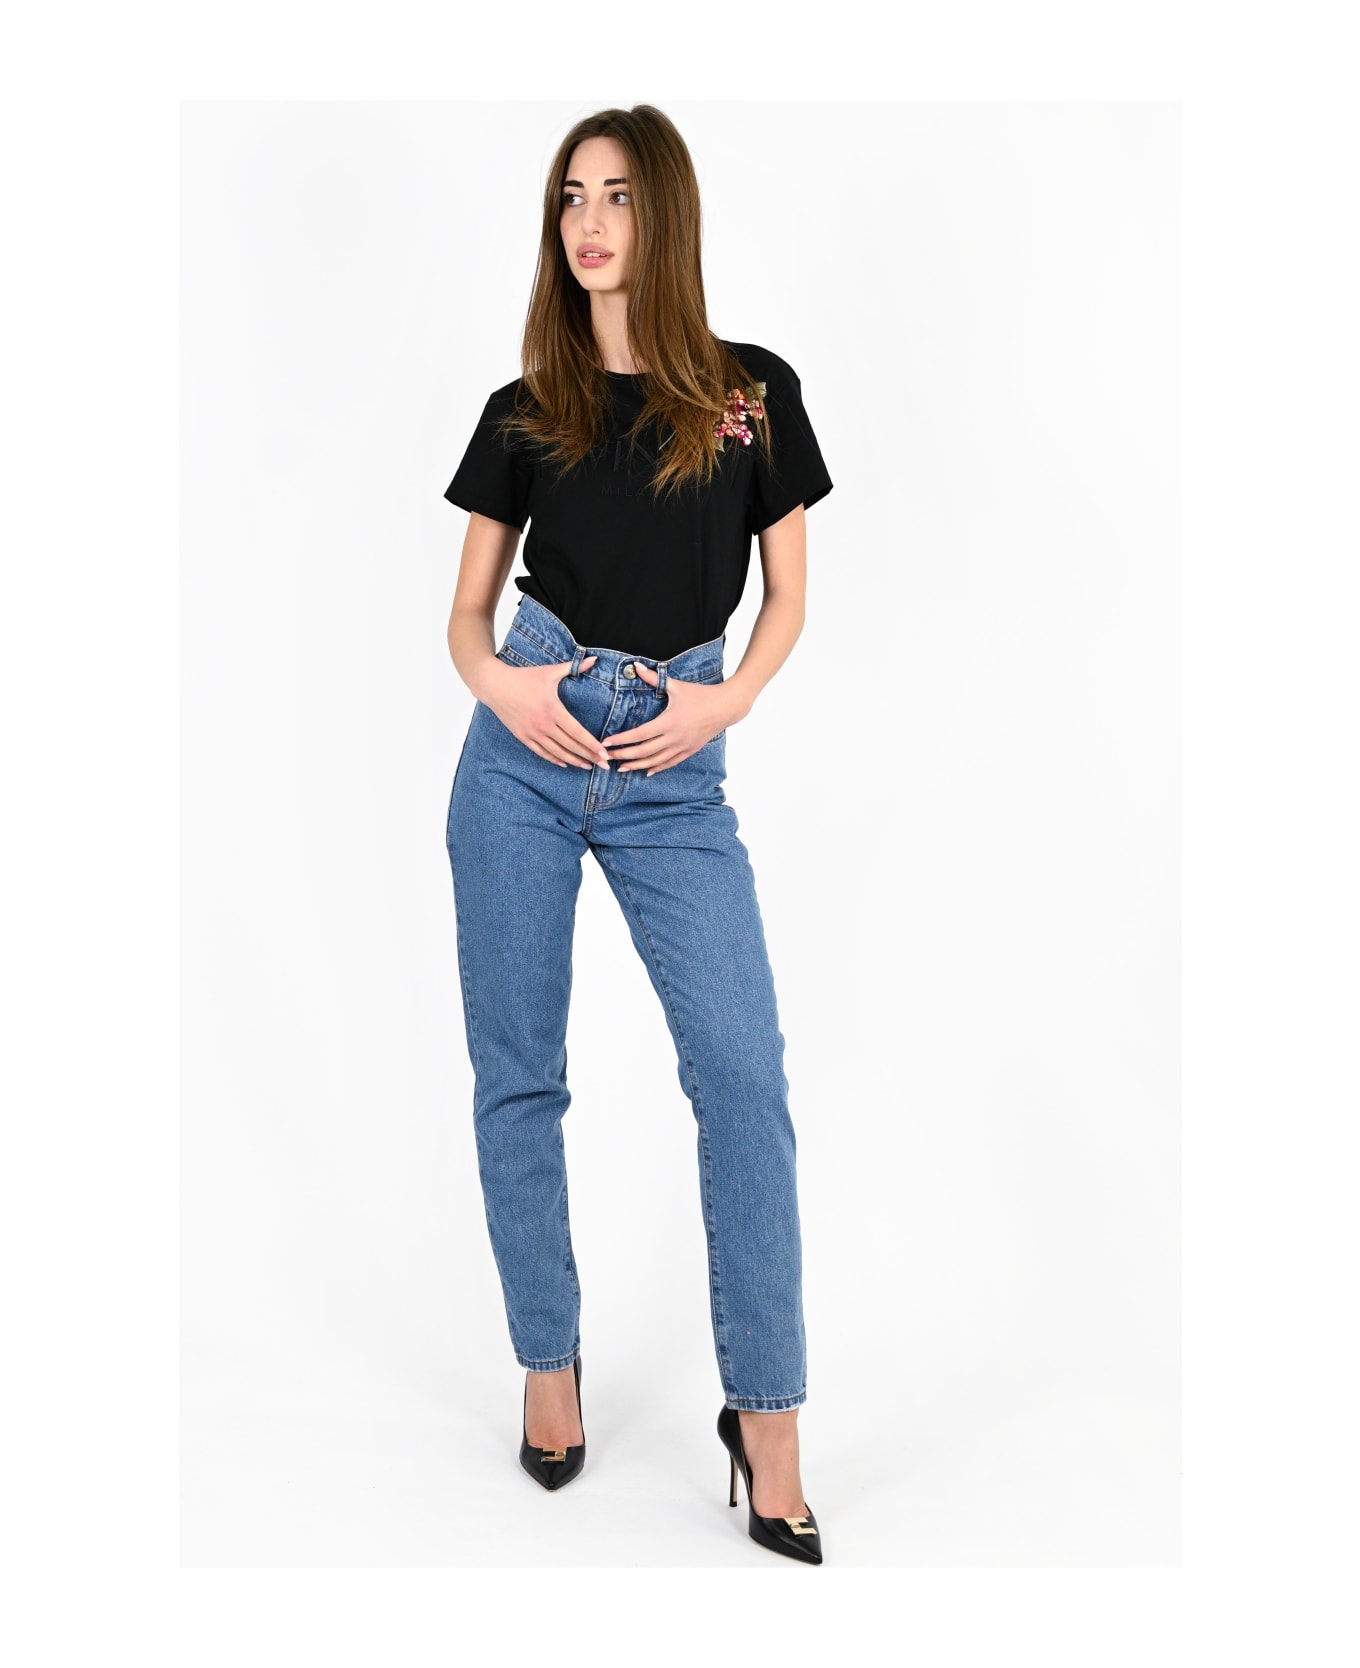 TwinSet Slim Fit Jeans With Floral Oval T - Denim